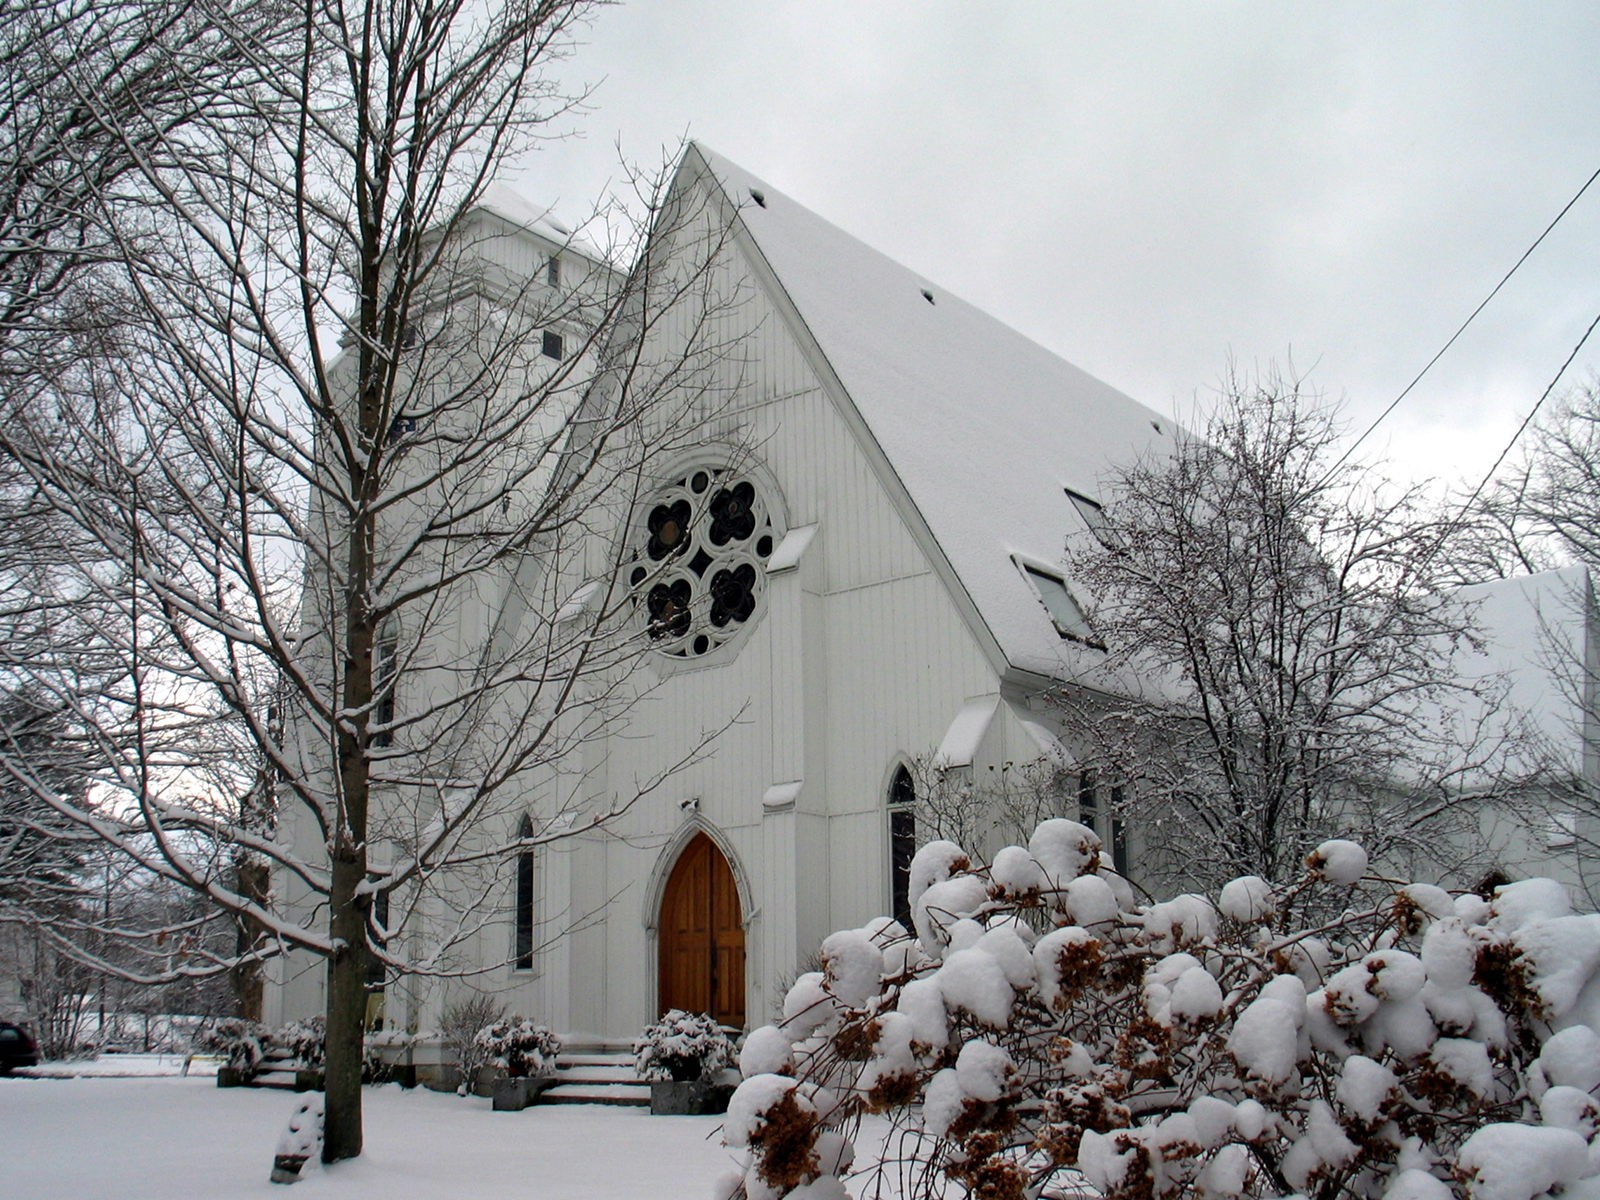 The Guthrie Center is housed in a former church in Stockbridge, Mass. The church is highlighted in Arlo Guthrie's song "Alice's Restaurant Massacree" Photo courtesy of Wikipedia/Creative Commons